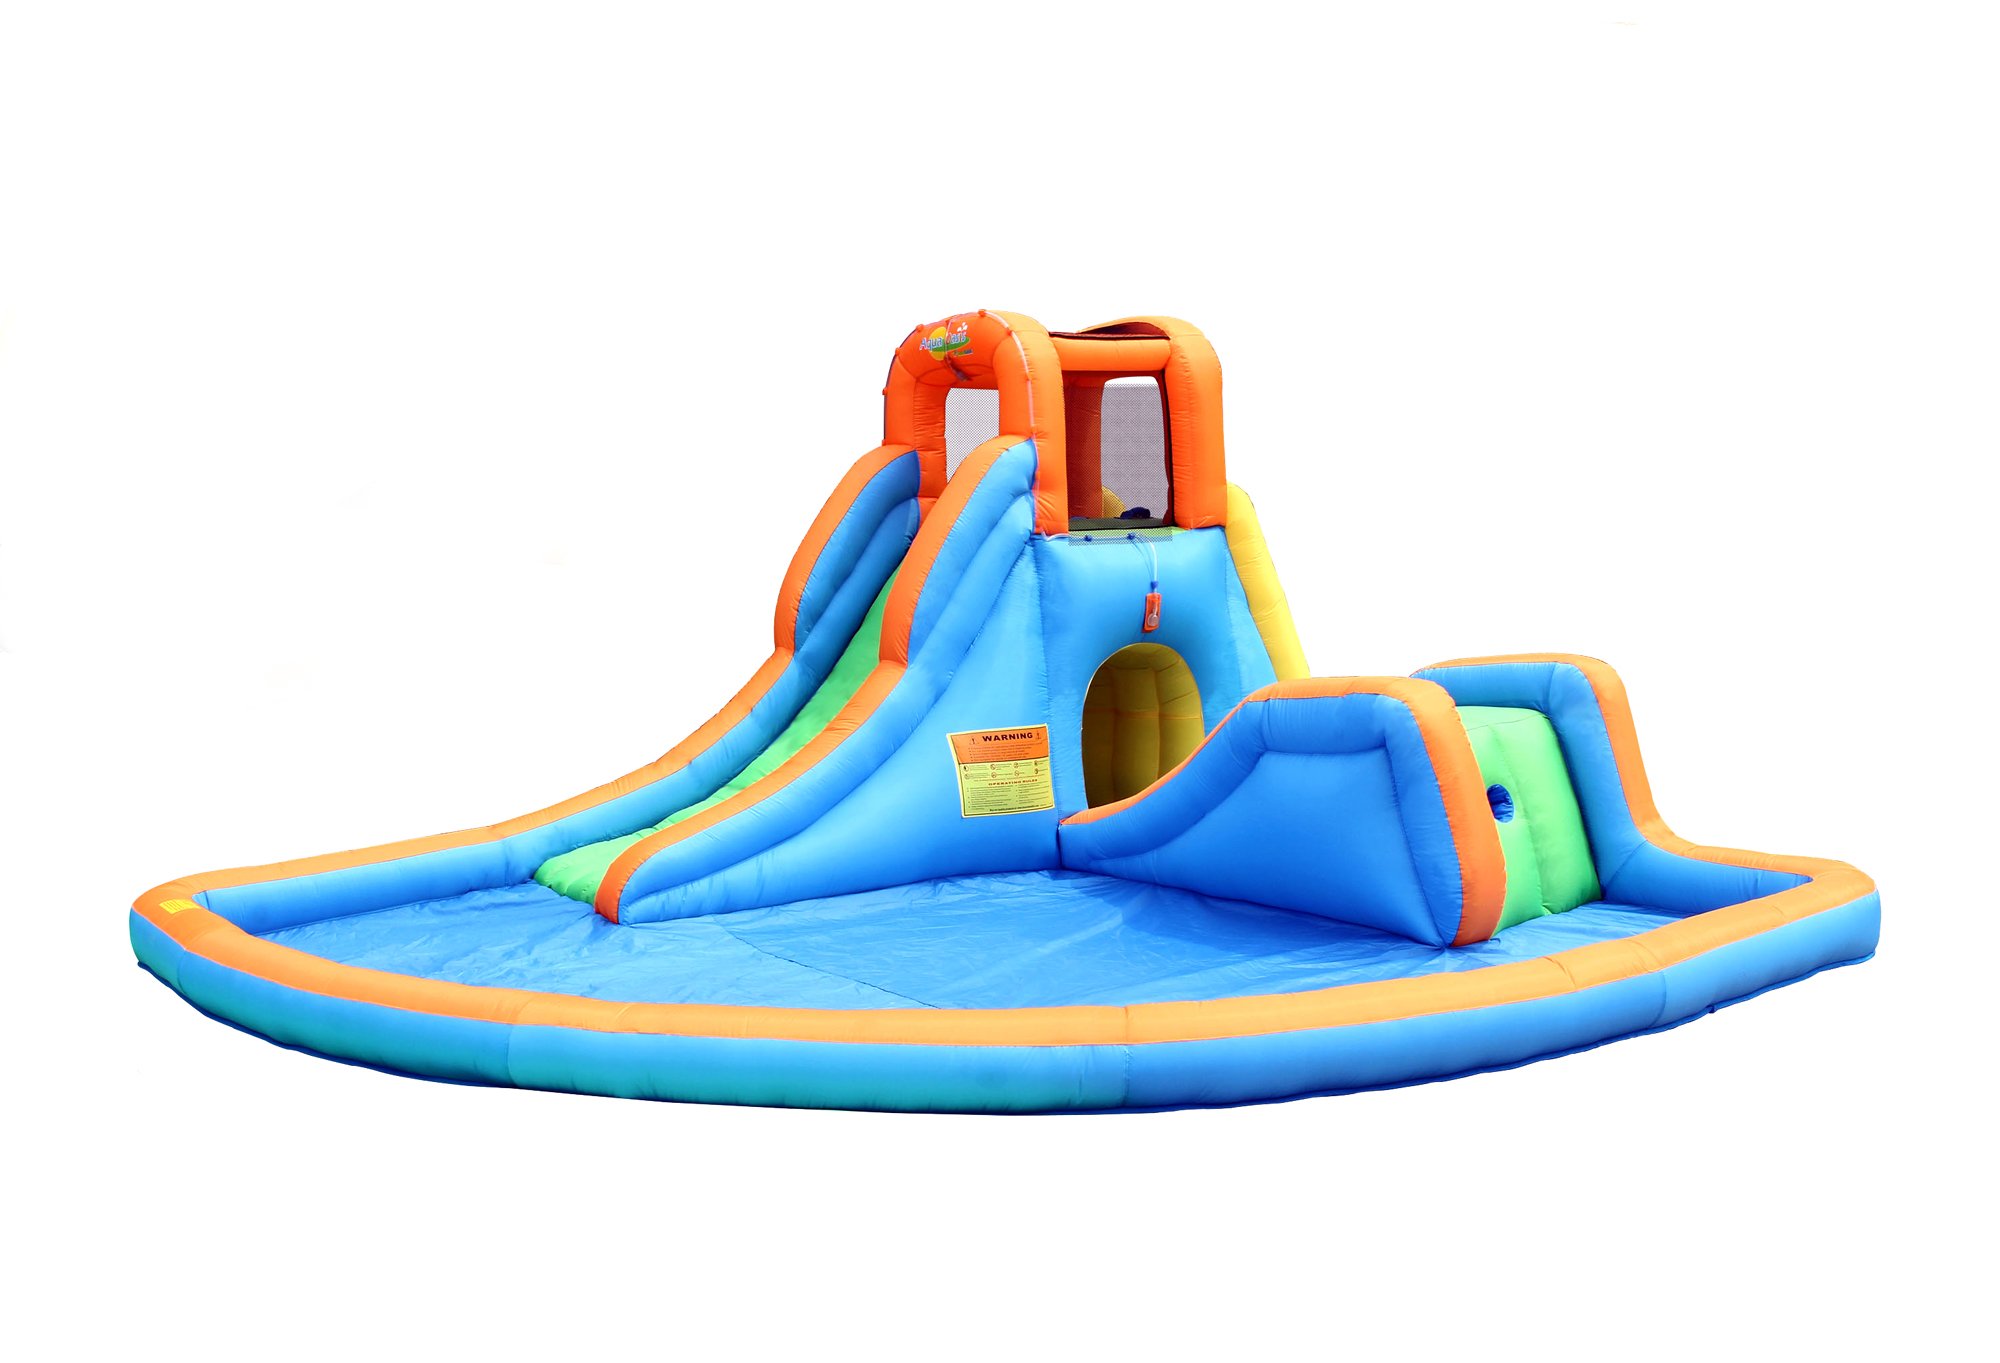 Bounceland Inflatable Cascade Water Slide with Large Pool, Two Water Slides, Water Sprayer for Splashing, UL Strong Blower Included, 16.5 ft x 16.5 ft x 7 ft H, Summer Party Must Have